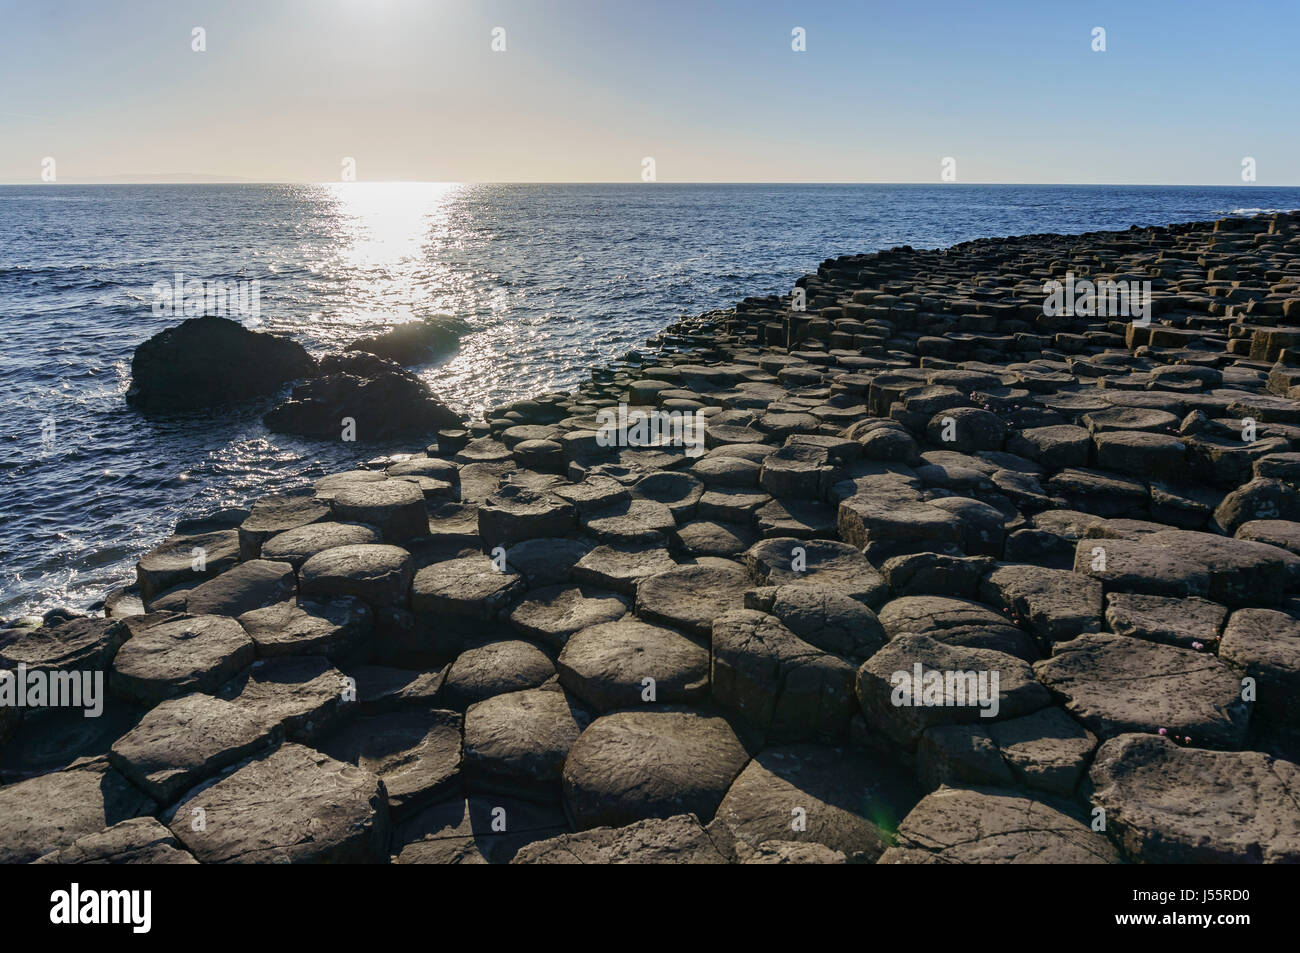 The famous ancient volcanic eruption - Giant's Causeway of County Antrim, Northern Ireland Stock Photo